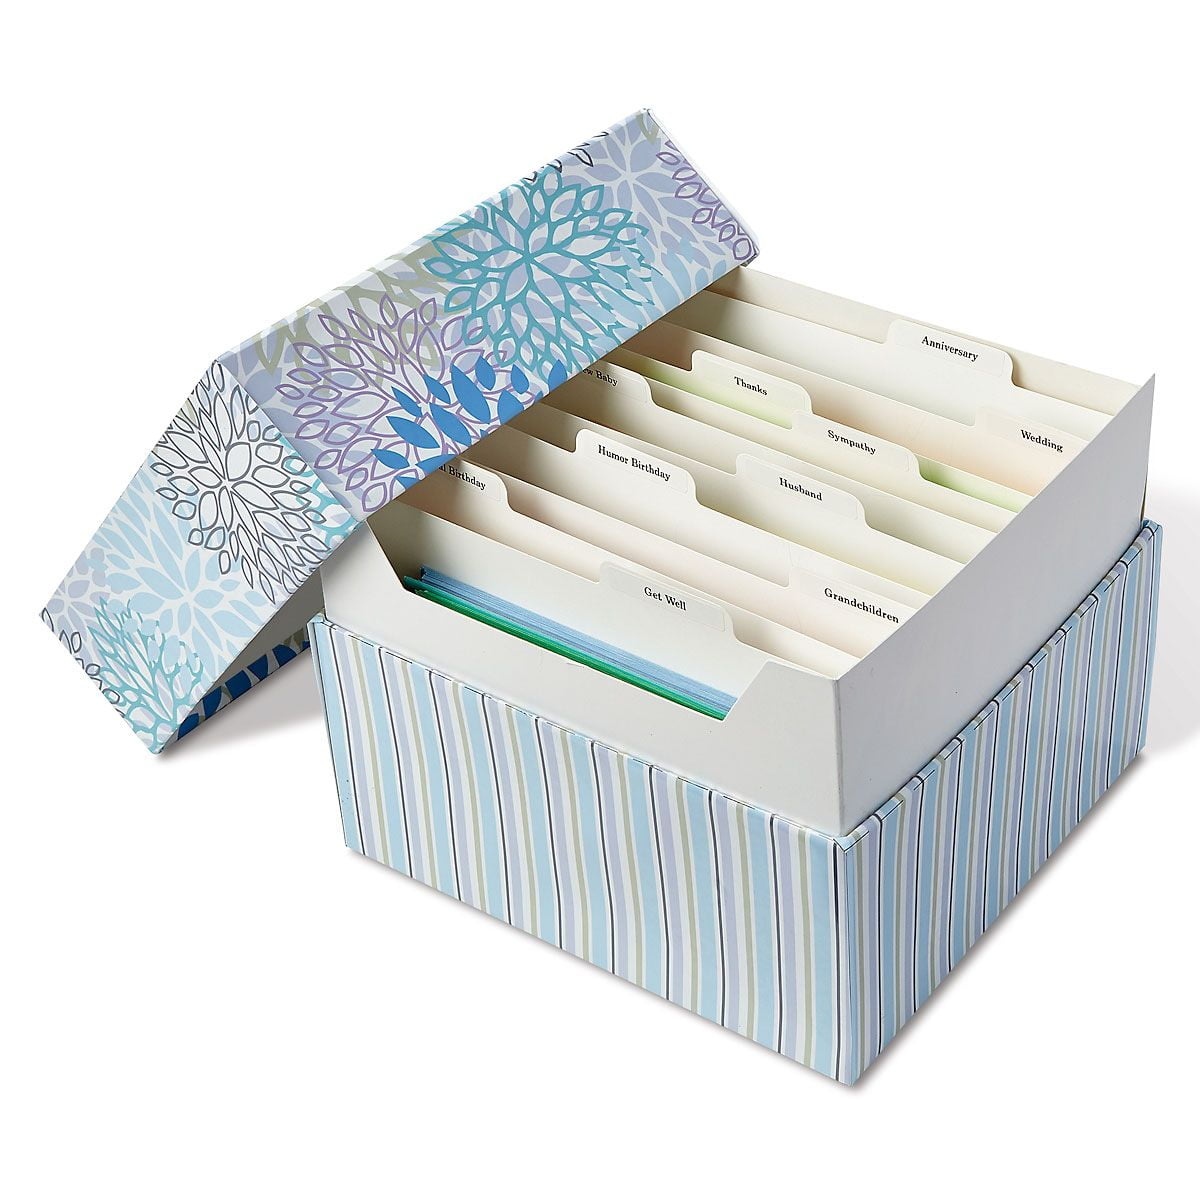 Cool Floral Greeting Card Organizer Box - 9 x 9-1/2W x 7H, holds 140+  cards (not included)